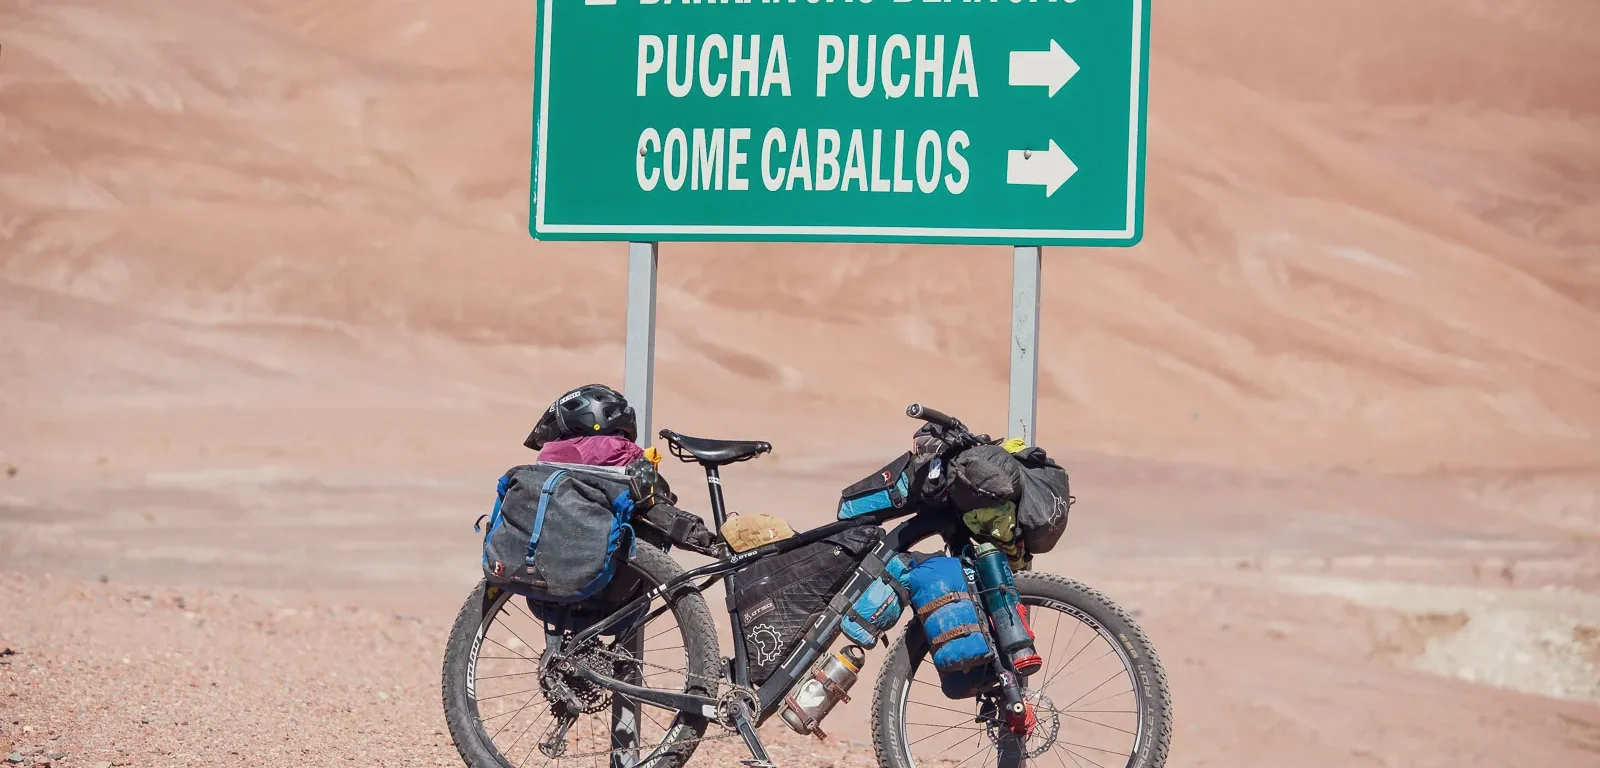 An Otso Cycles Voytek fat bike leans against a street sign in the Andes Mountains. The hills behind are covered in rocks and sand. The sign reads Barrancas Blancas, Pucha Pucha, and Come Caballos.